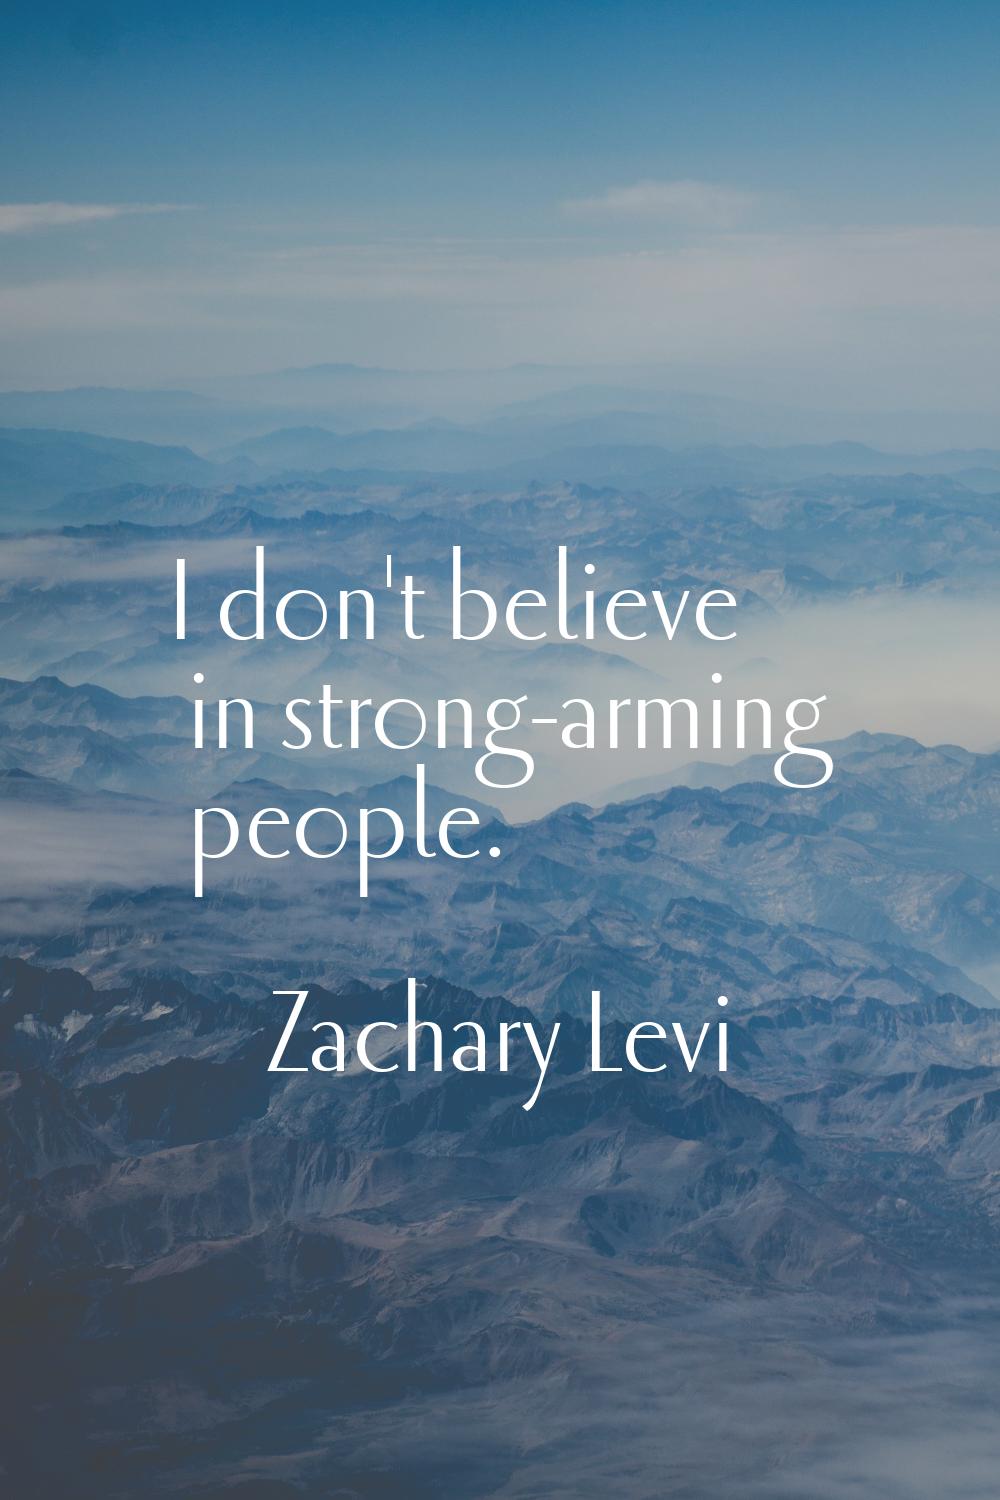 I don't believe in strong-arming people.